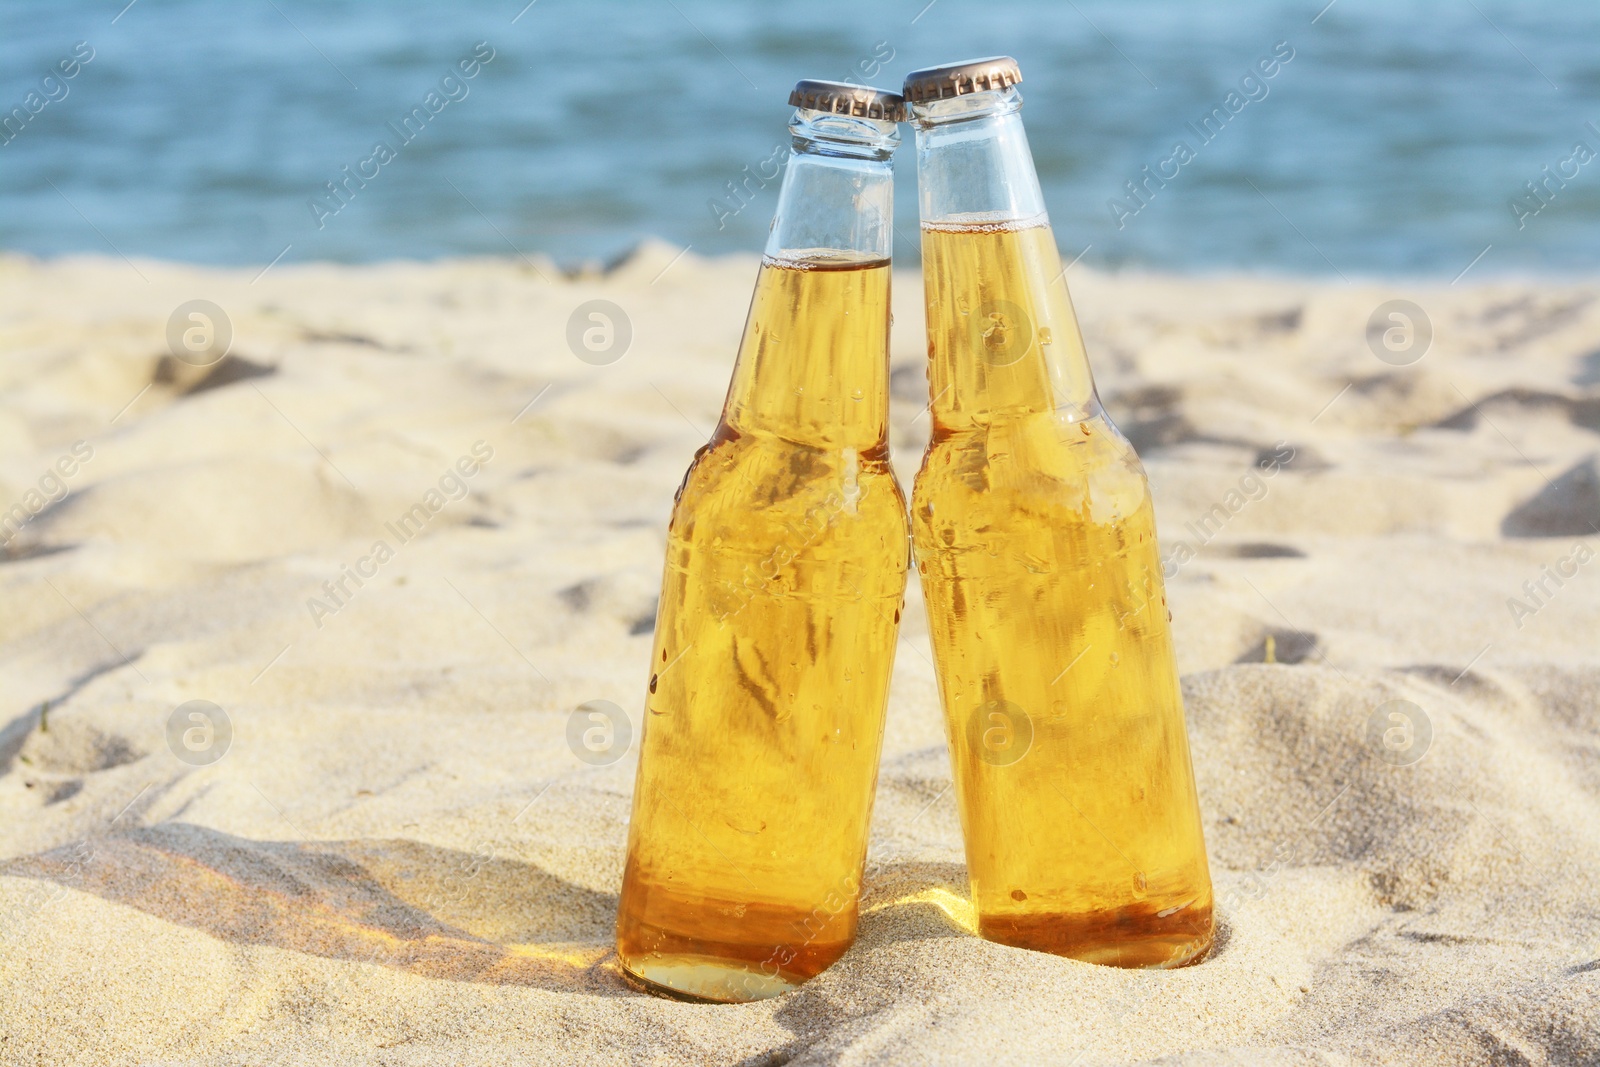 Photo of Bottles of cold beer on sandy beach near sea